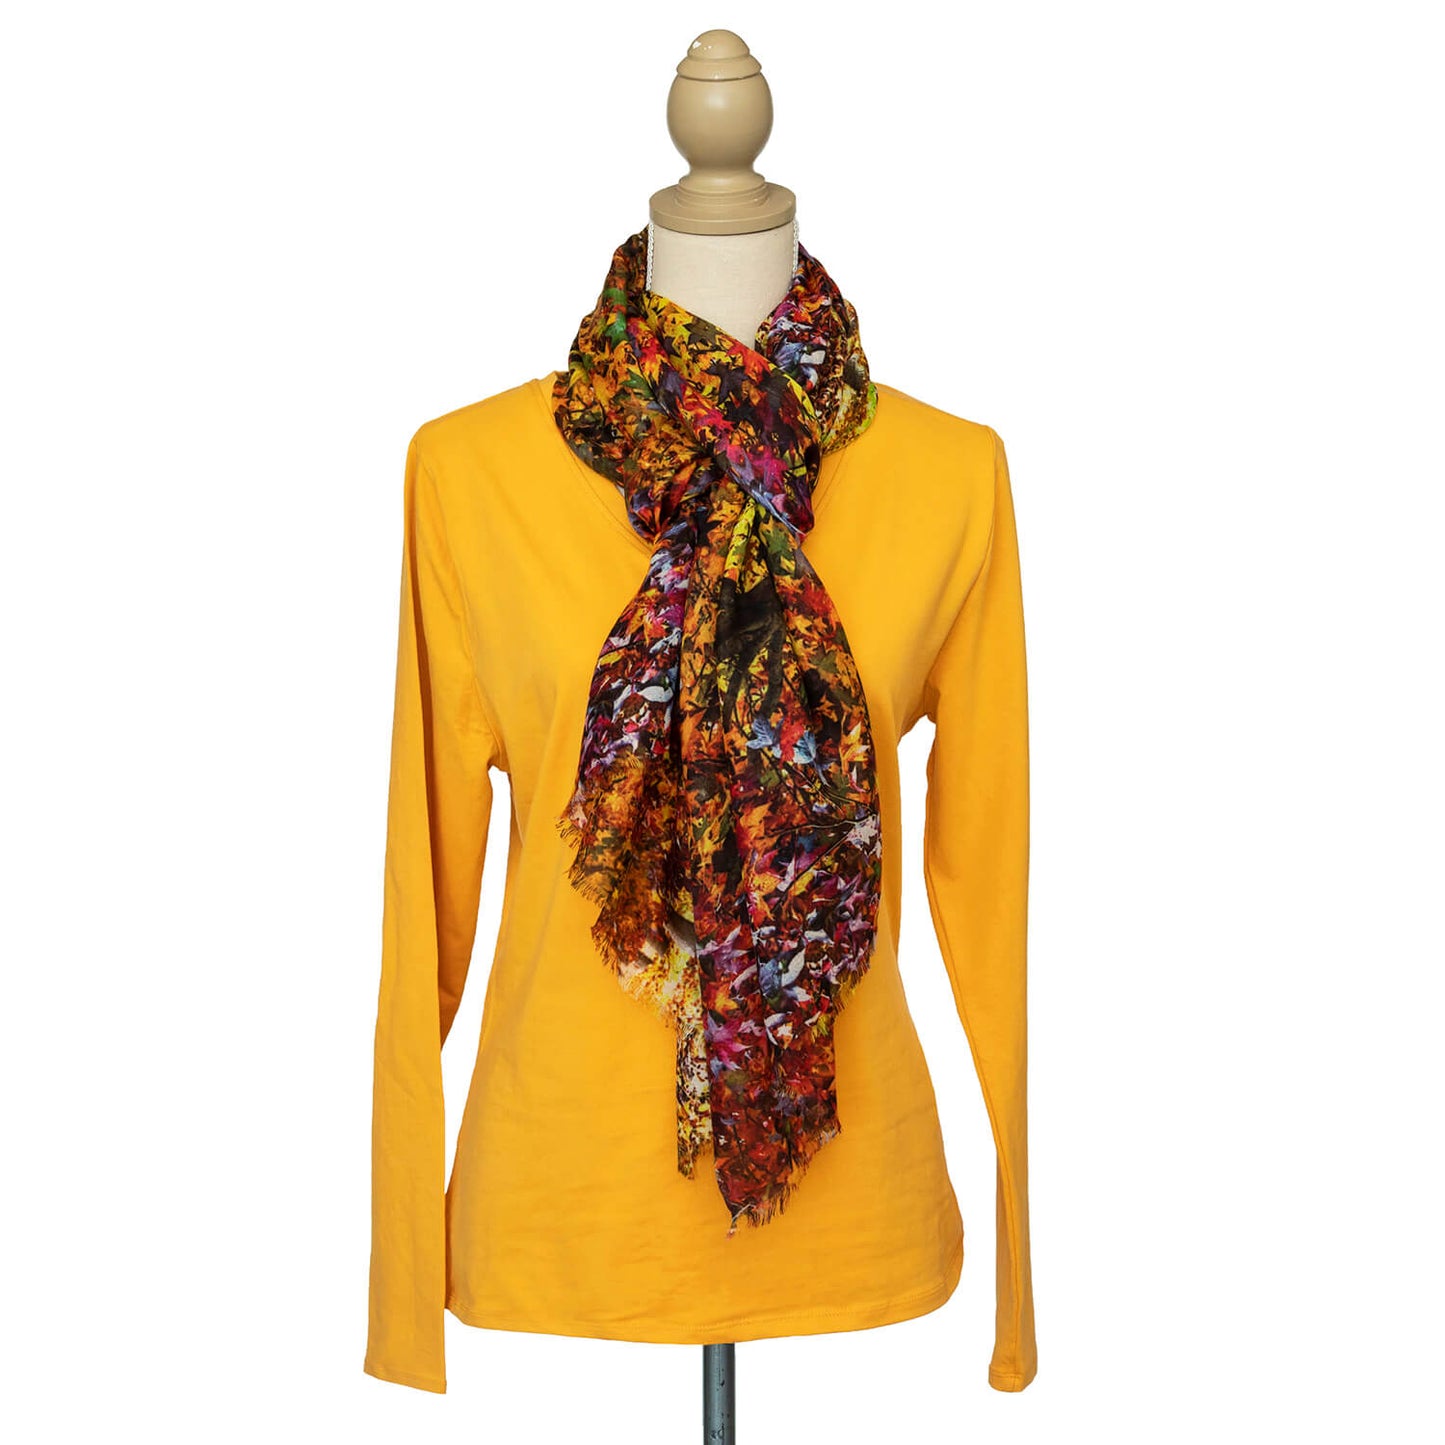 autumn wool cashmere scarf with mustard top by seahorse silks